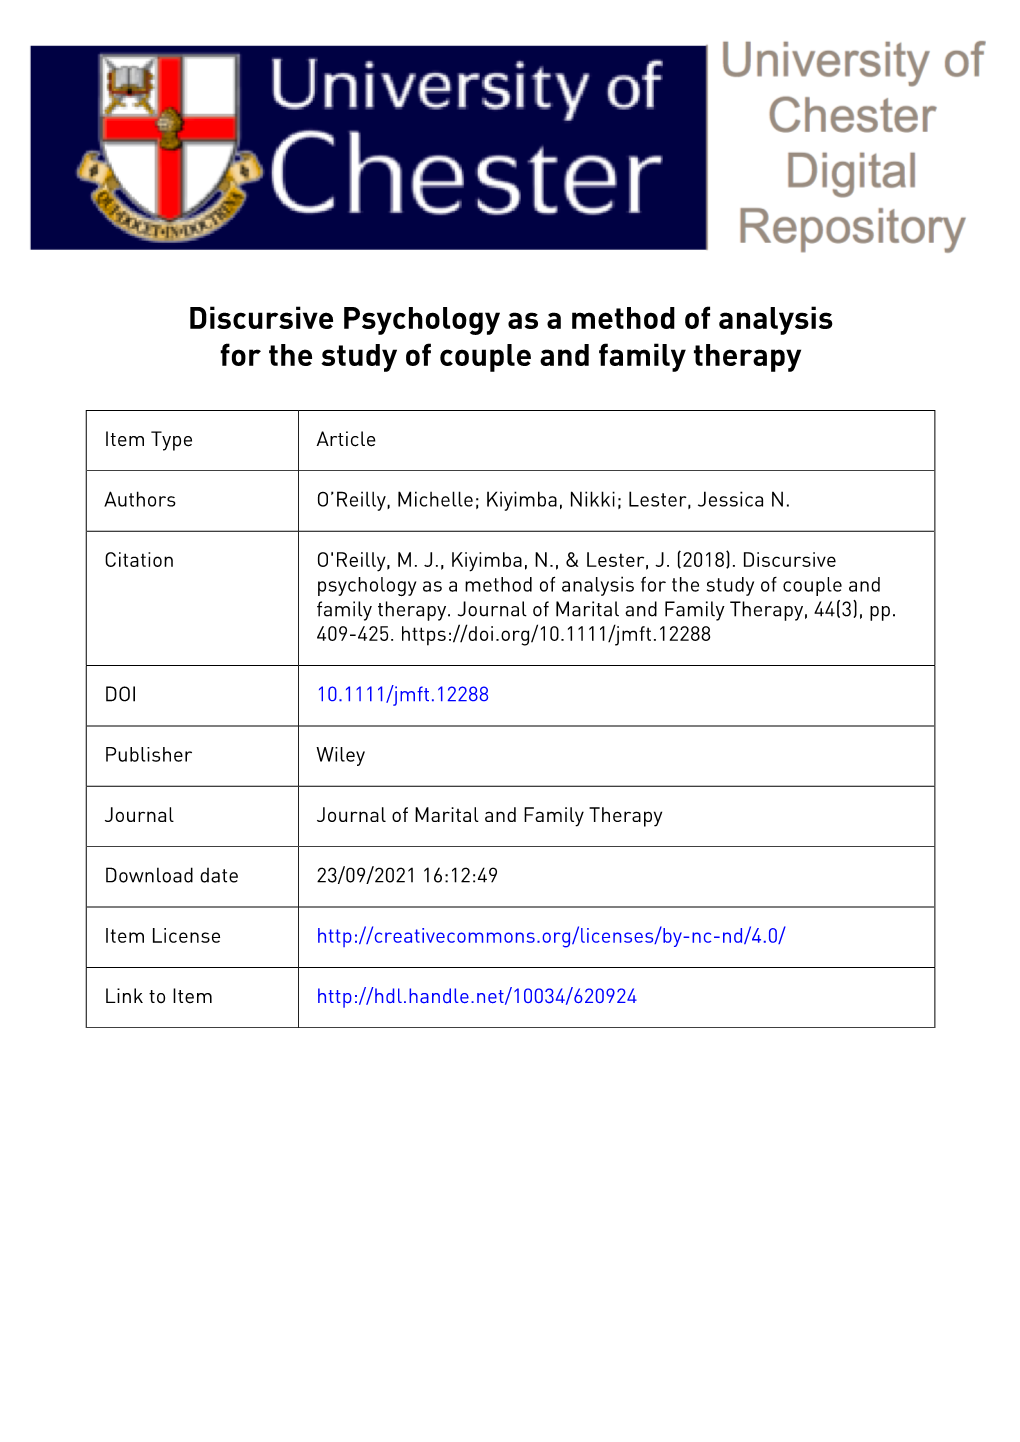 Discursive Psychology As a Method of Analysis for the Study of Couple and Family Therapy